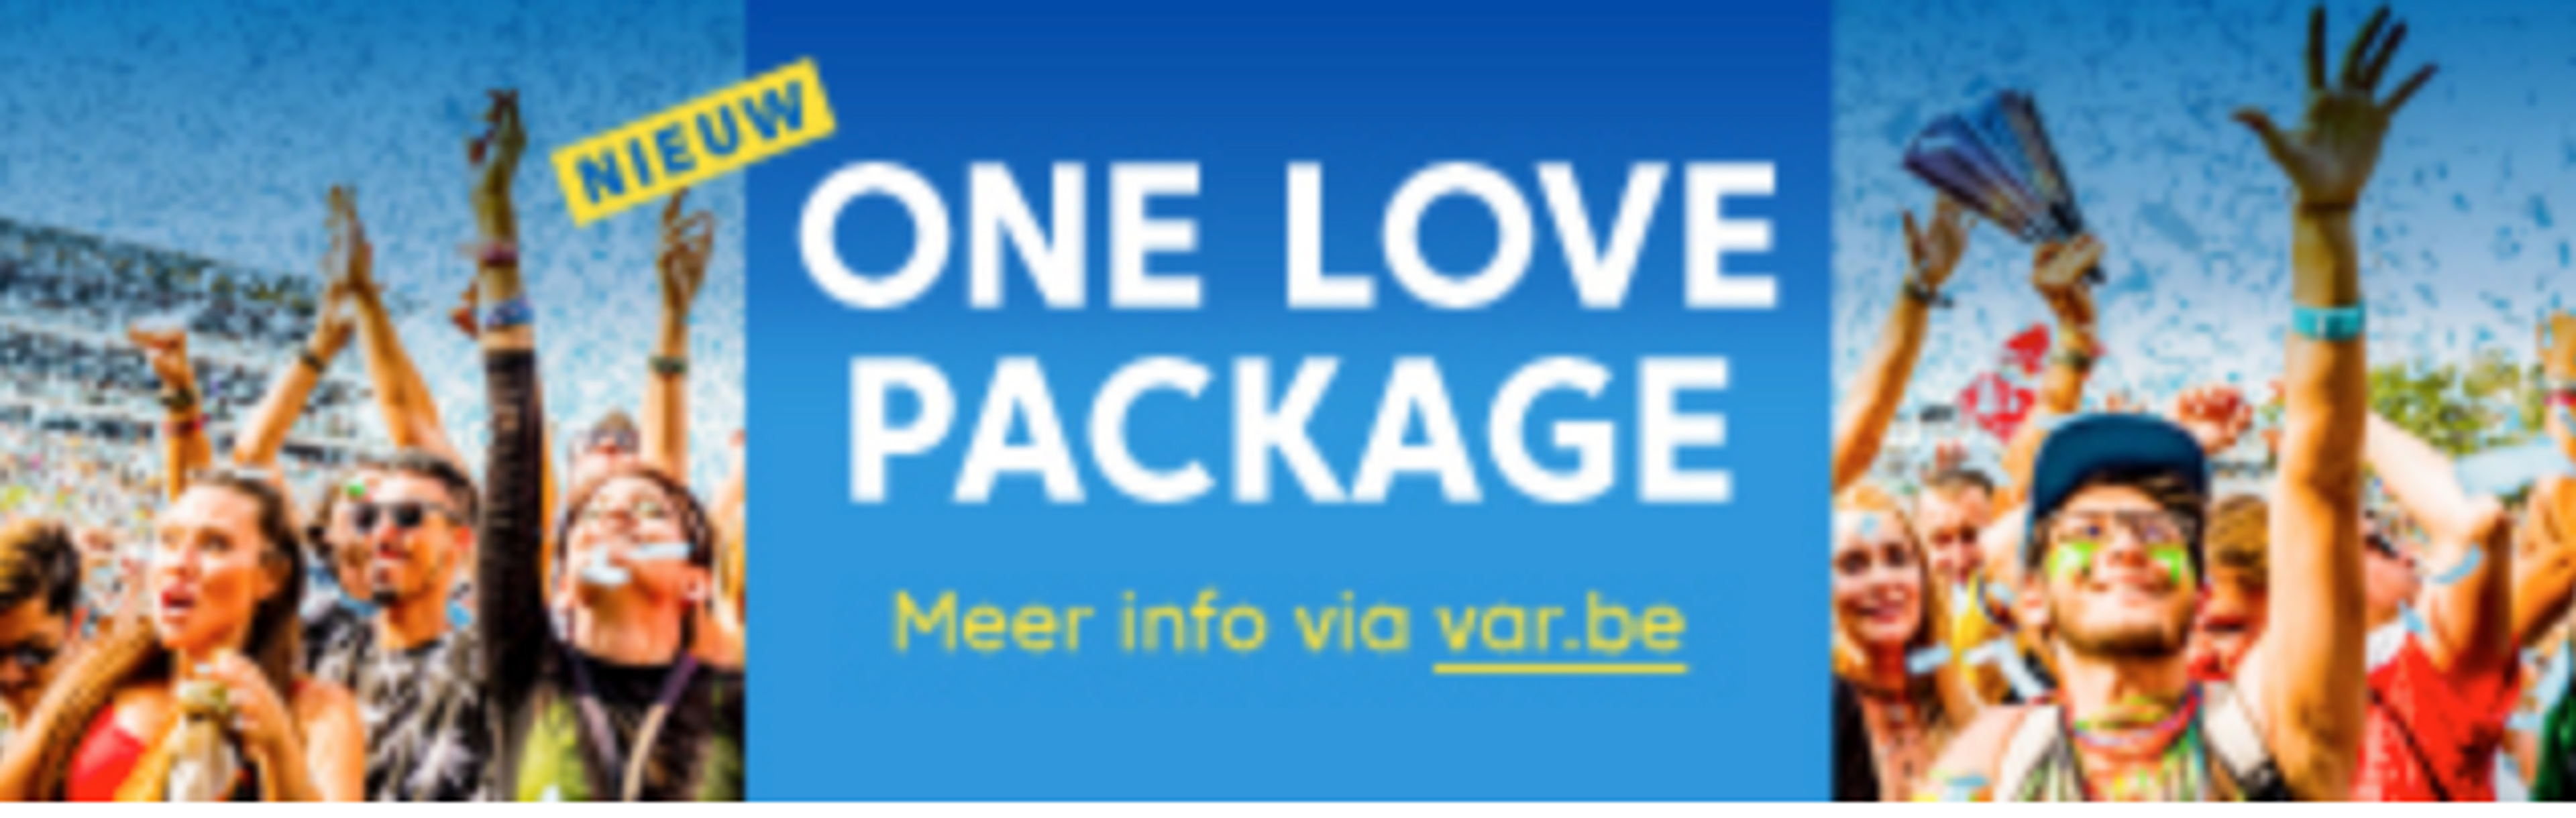 one love package